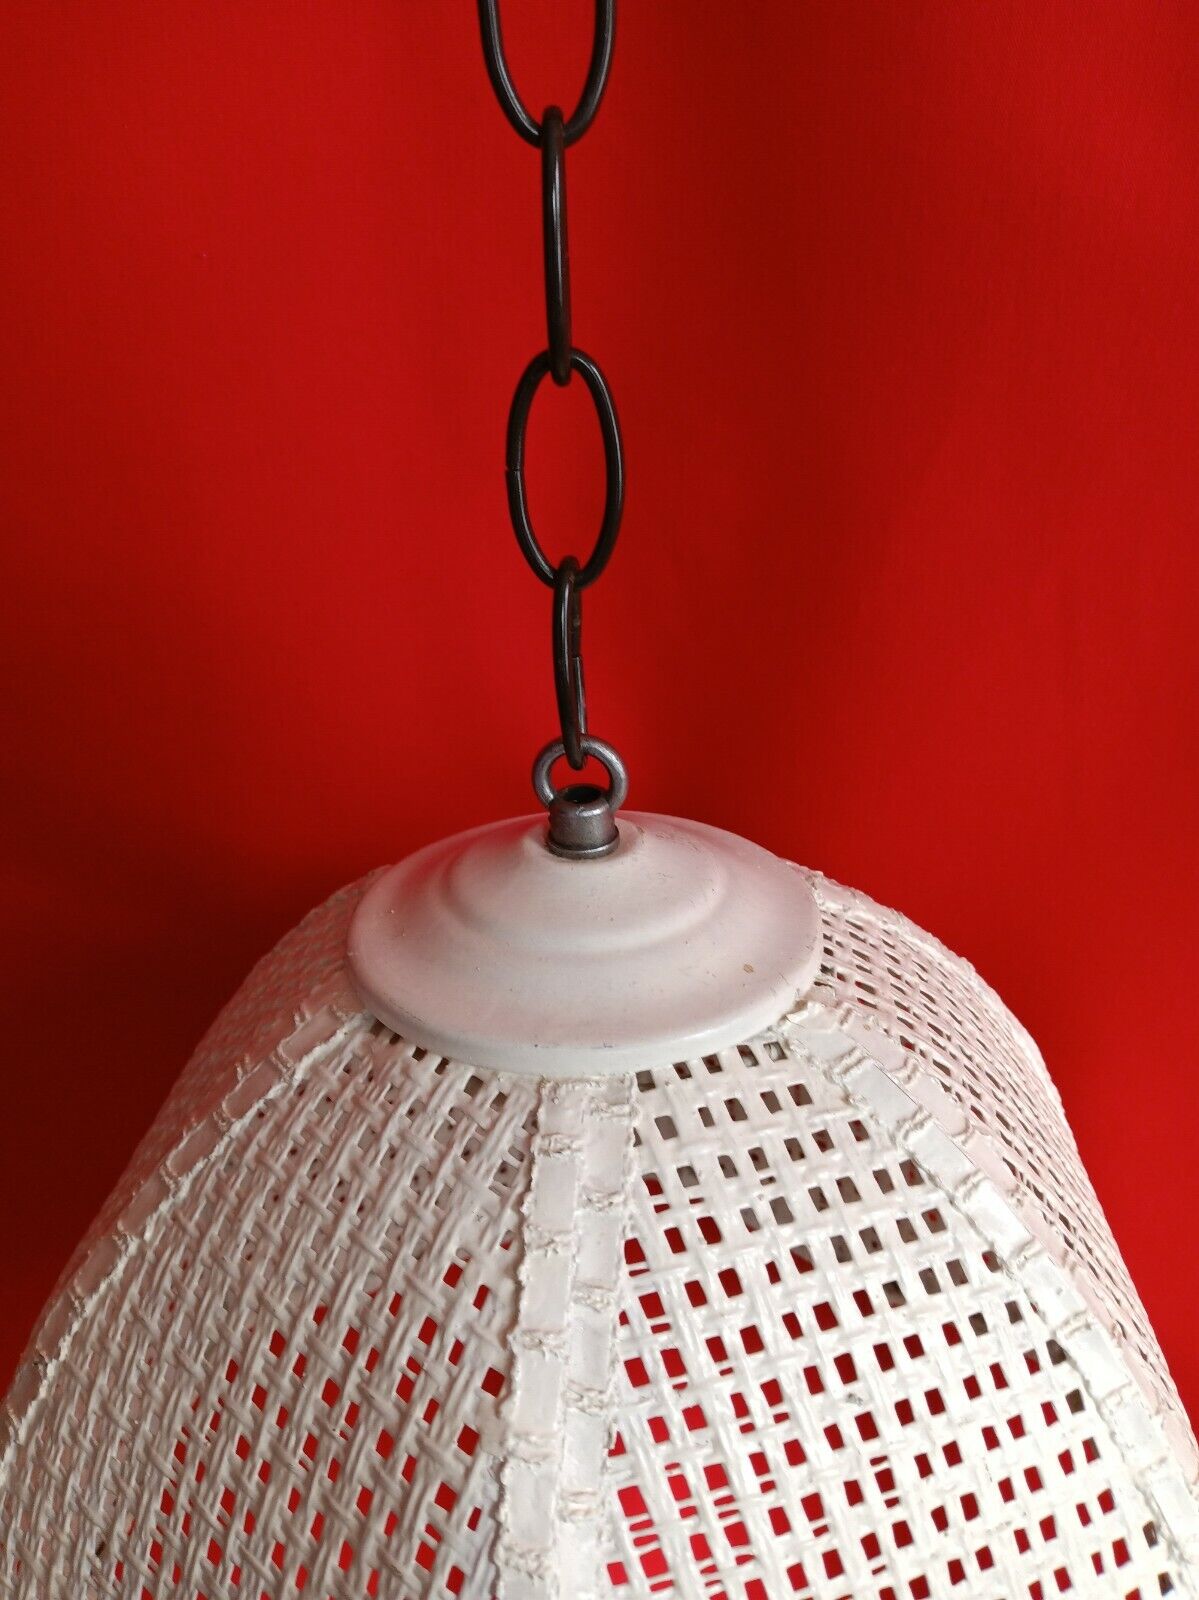 Wicker Rattan Pendant Hanging Lampshade Bell-Shaped Metal Chain White Painted